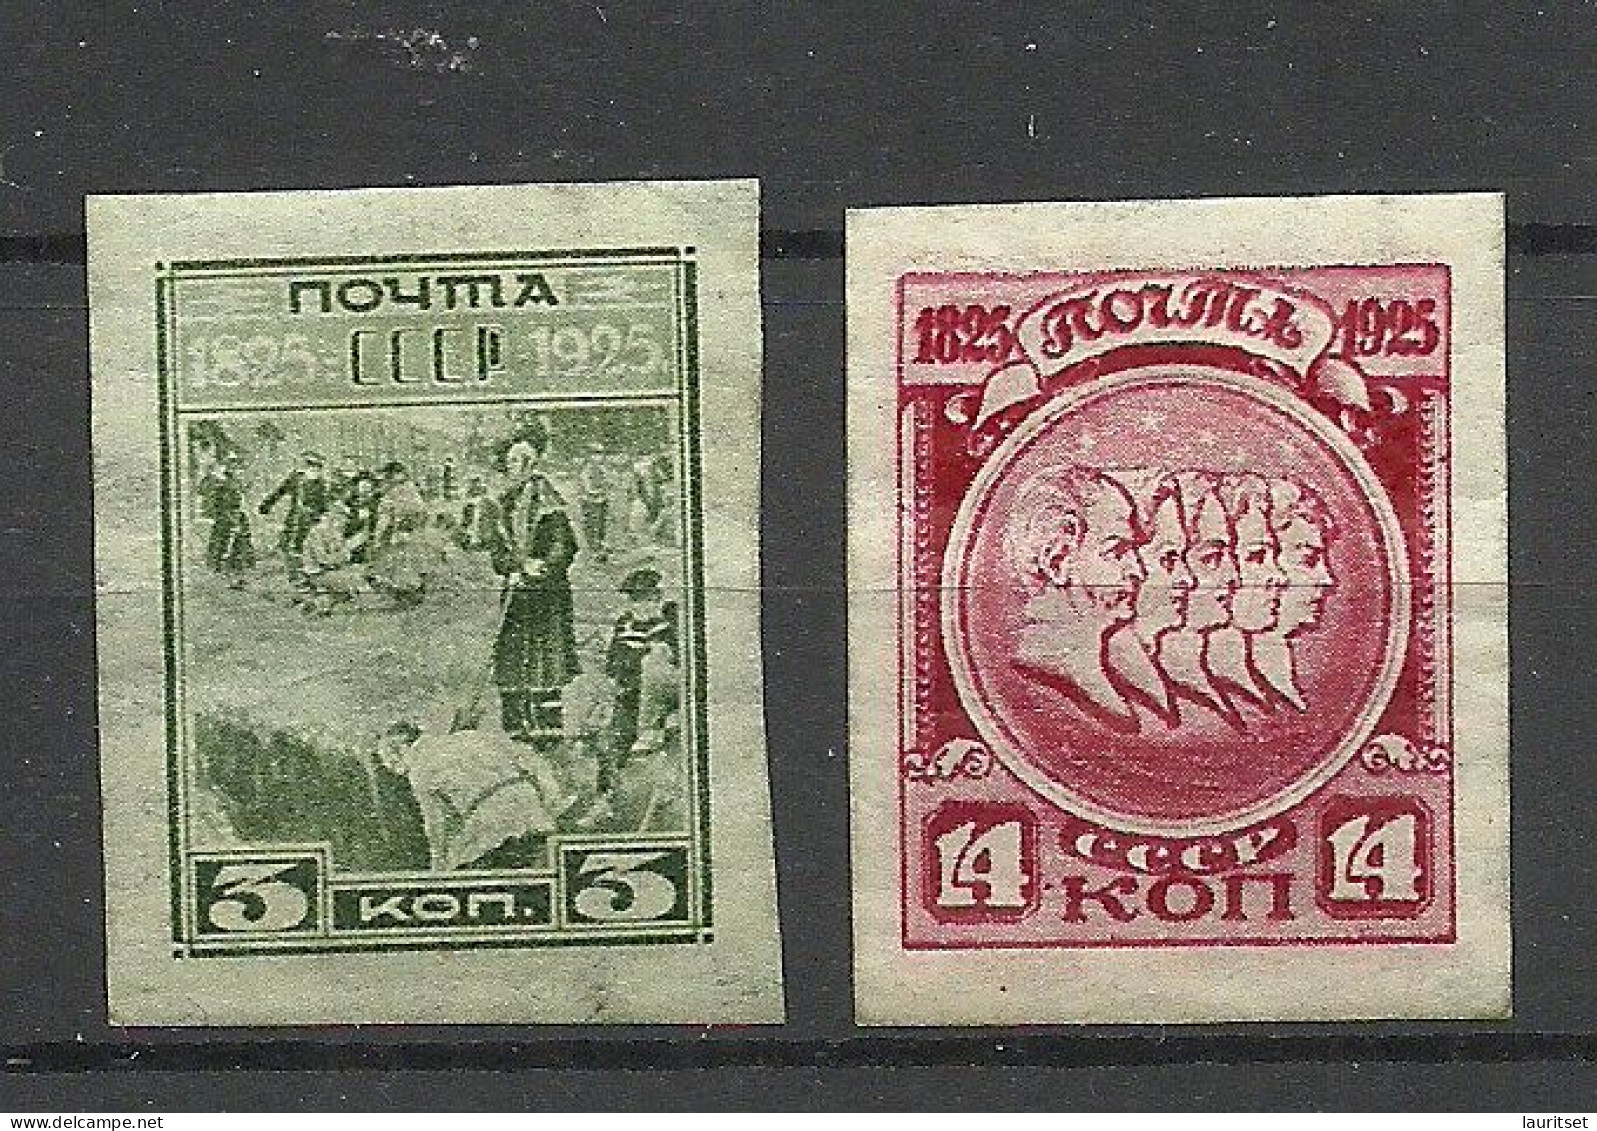 RUSSLAND RUSSIA 1925 Michel 305 & 307 B * - Unused Stamps